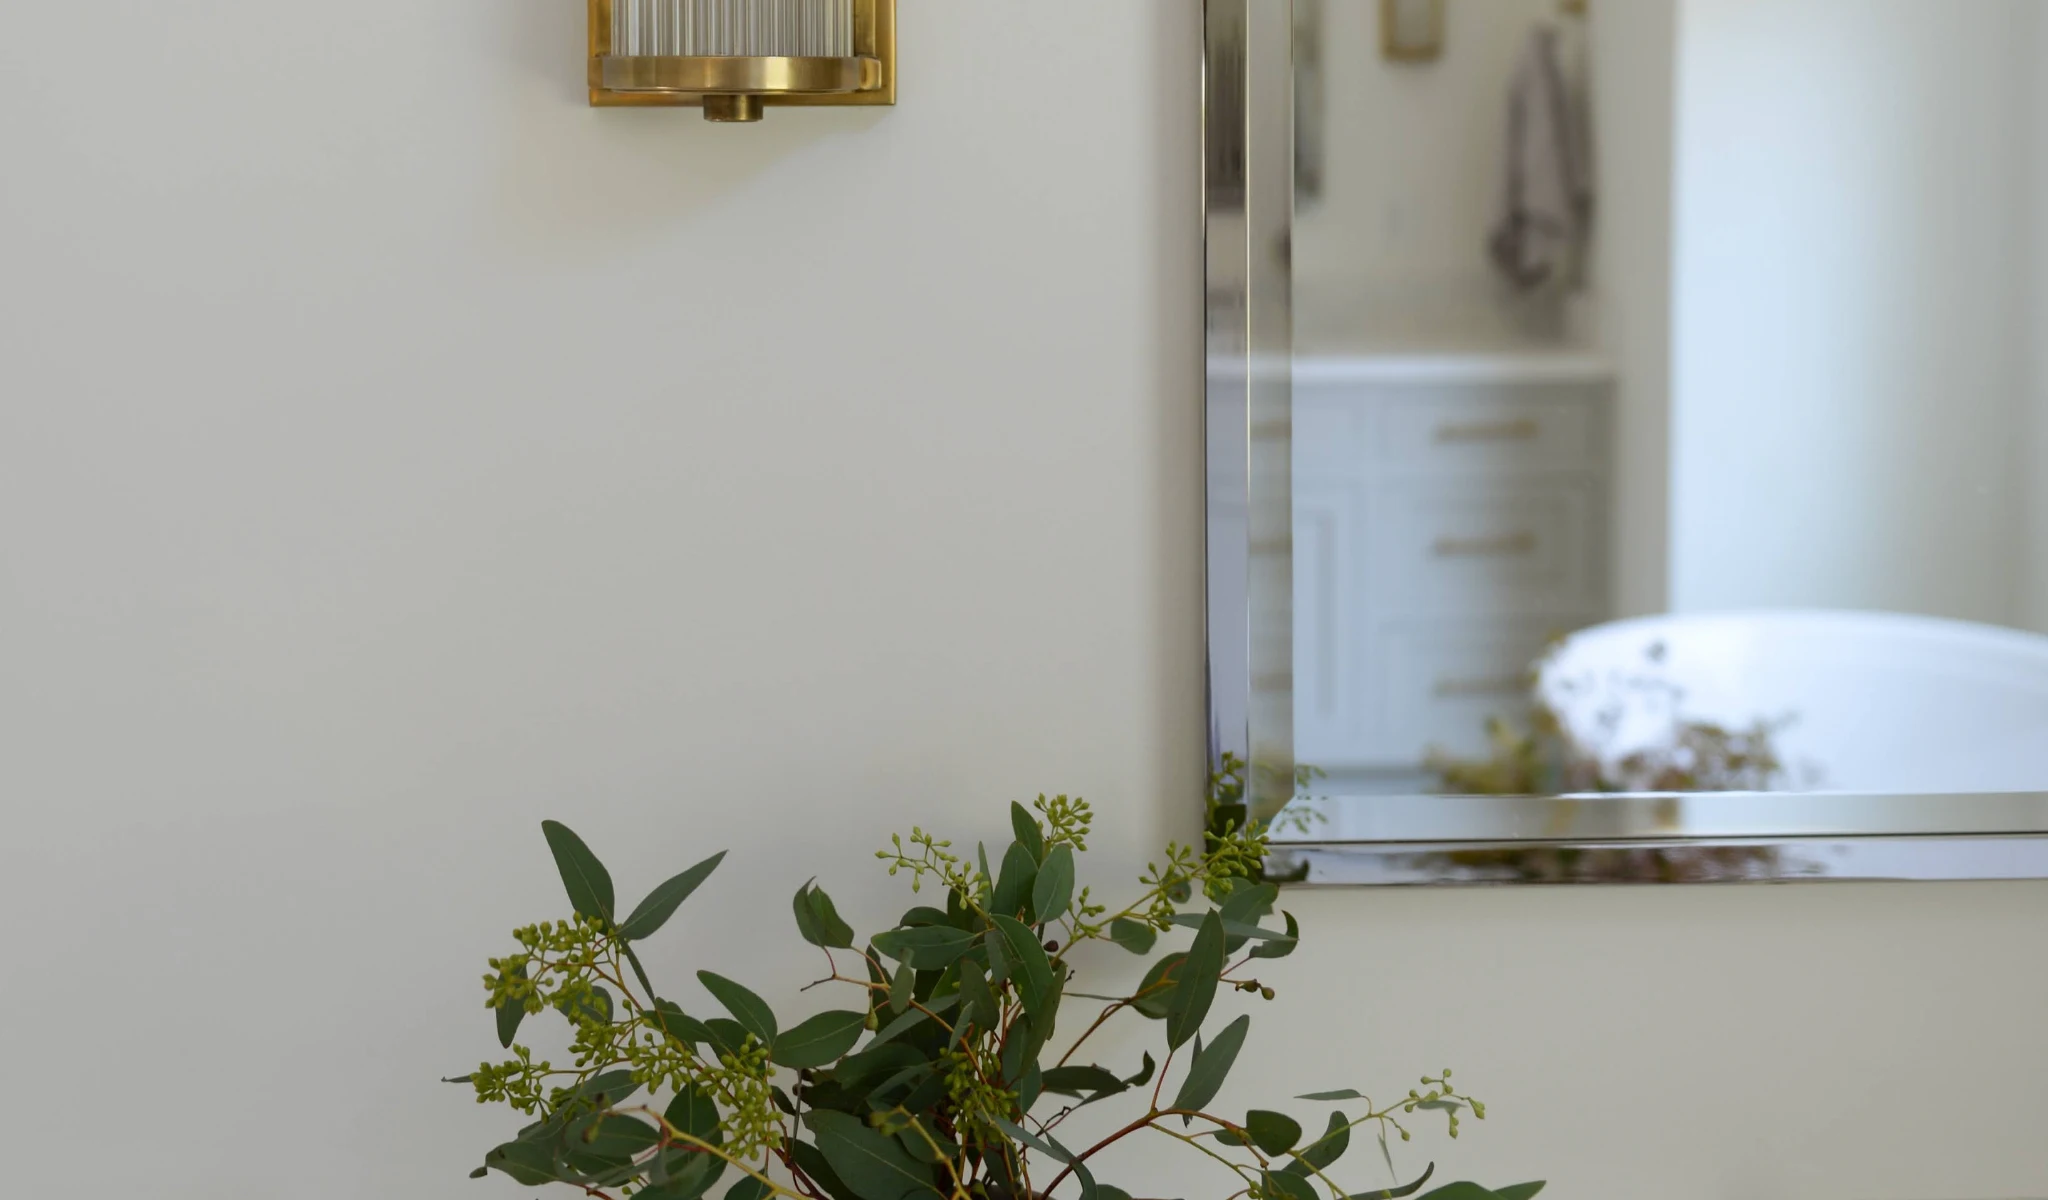 A bathroom with a mirror and a potted plant.